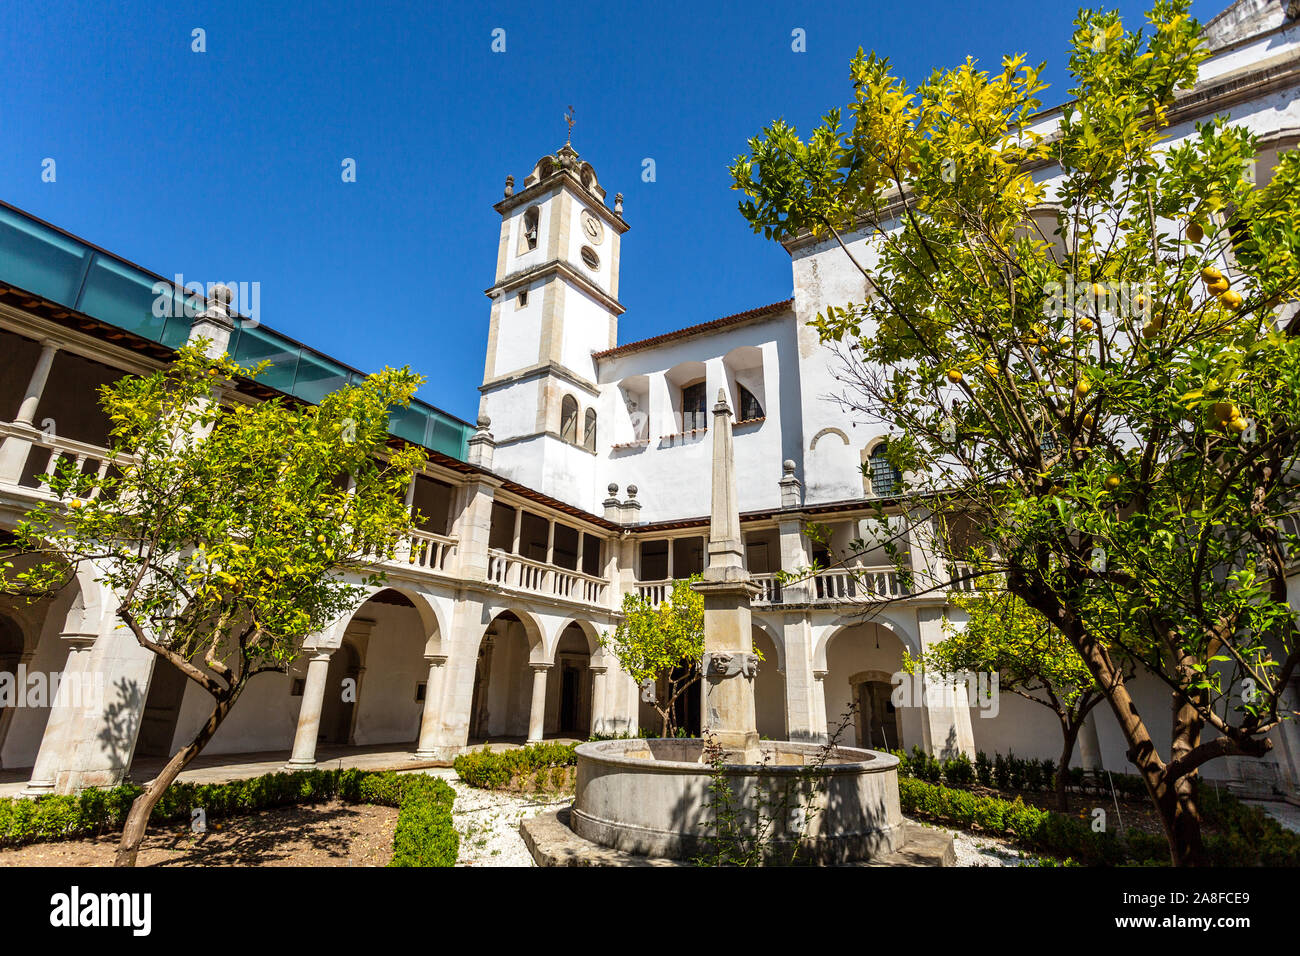 View of the Renaissance cloister with roman arches and Doric columns of the Monastery of Saint Mary of Lorvao, Coimbra, Portugal Stock Photo